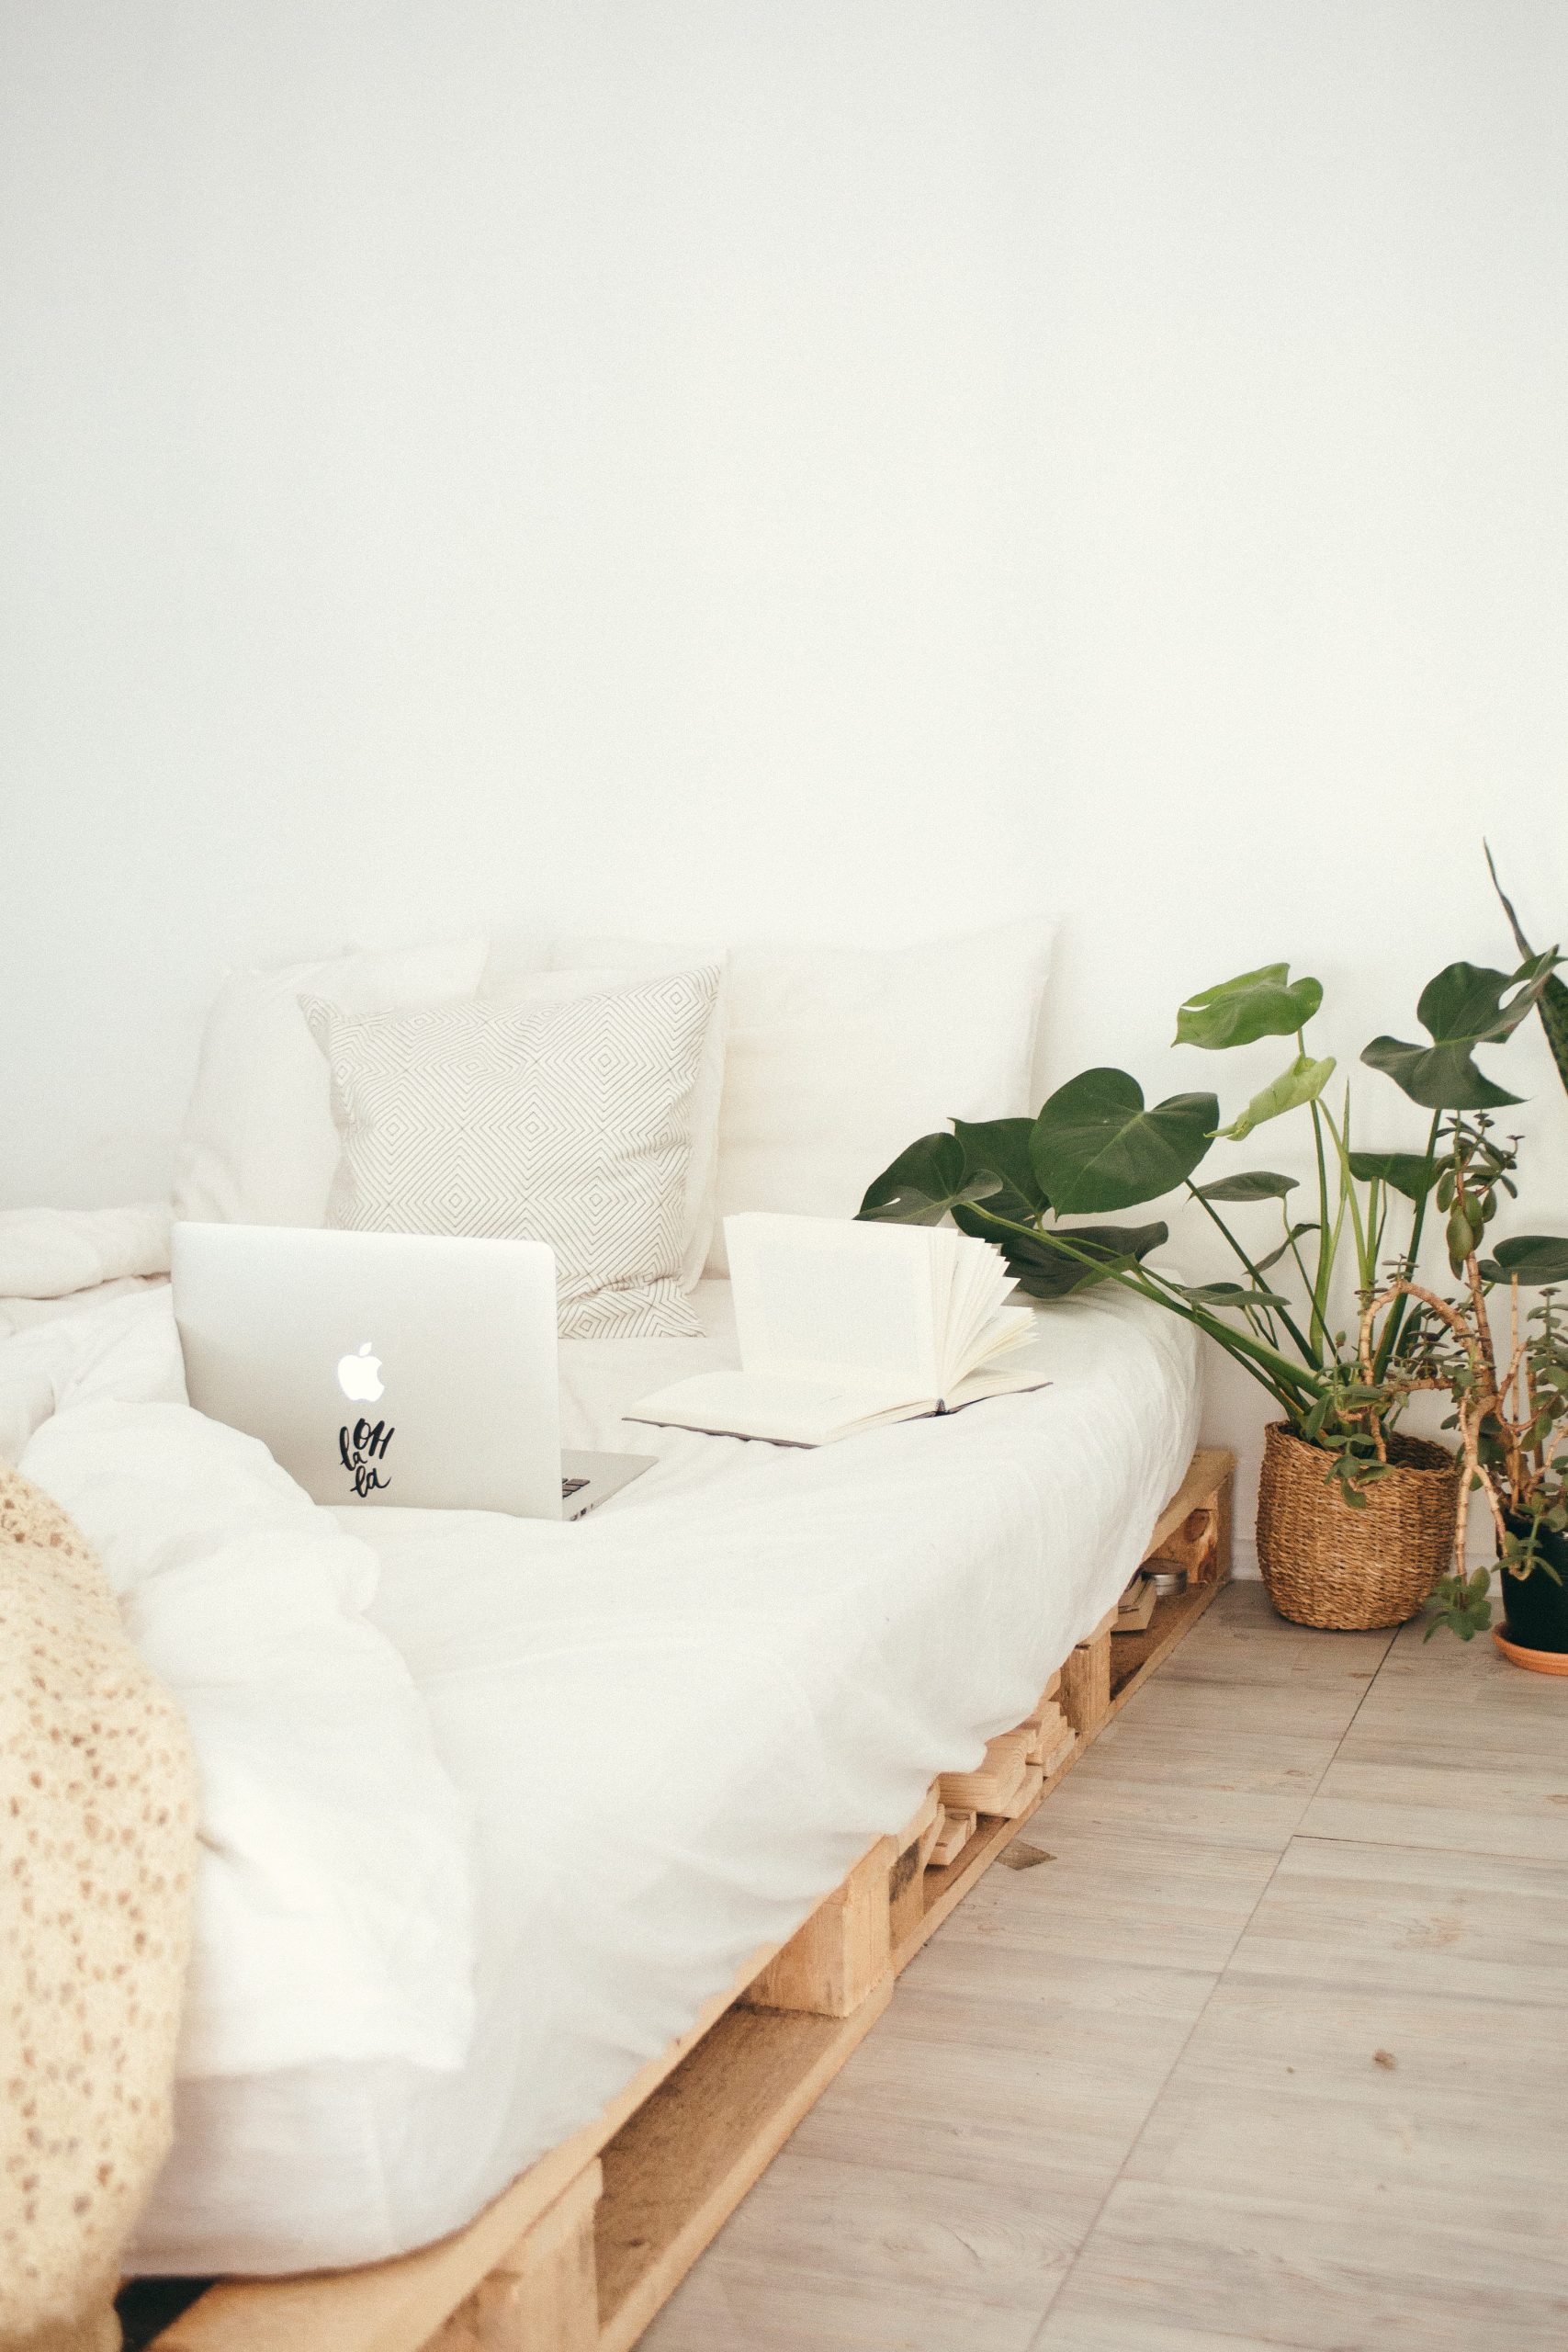 An organised white bed with a laptop and plants